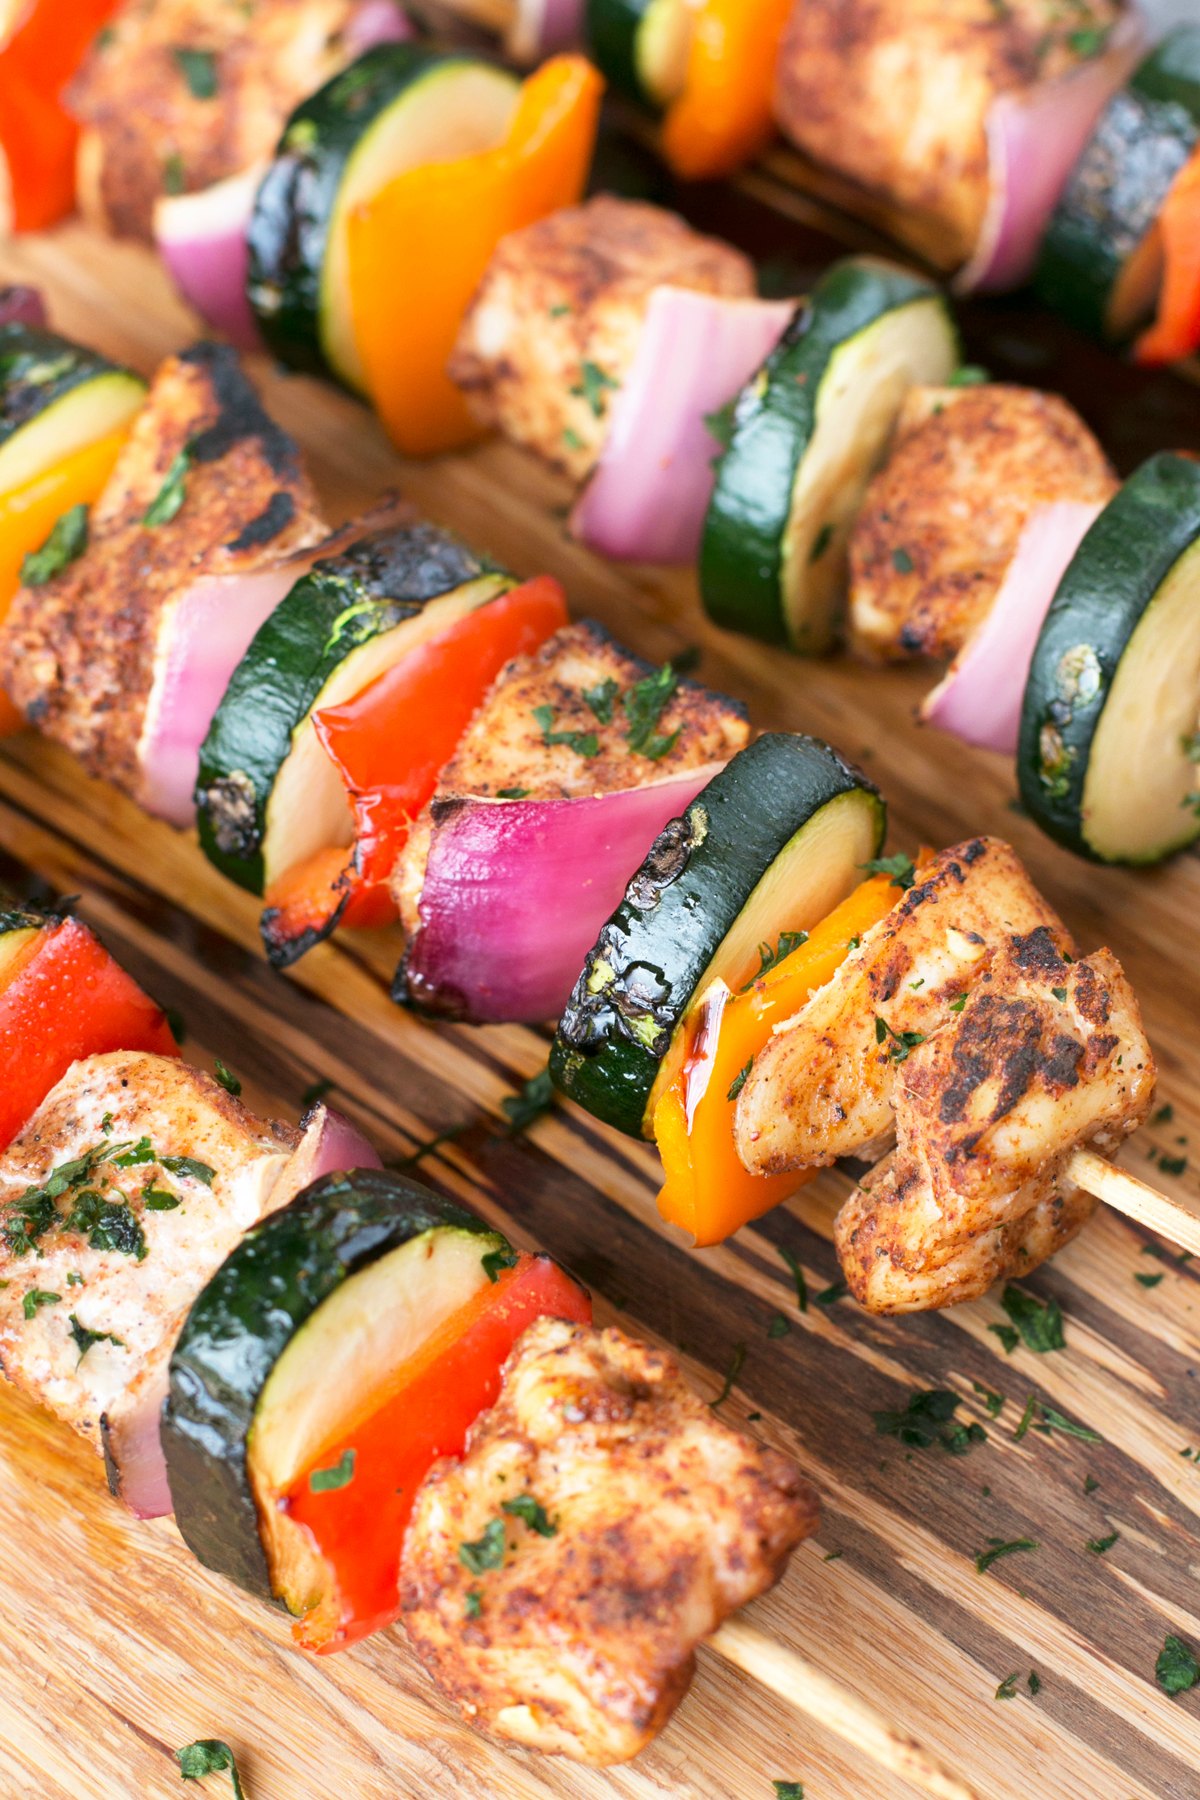 Seasoned vegetable and chicken kabobs on a wooden platter